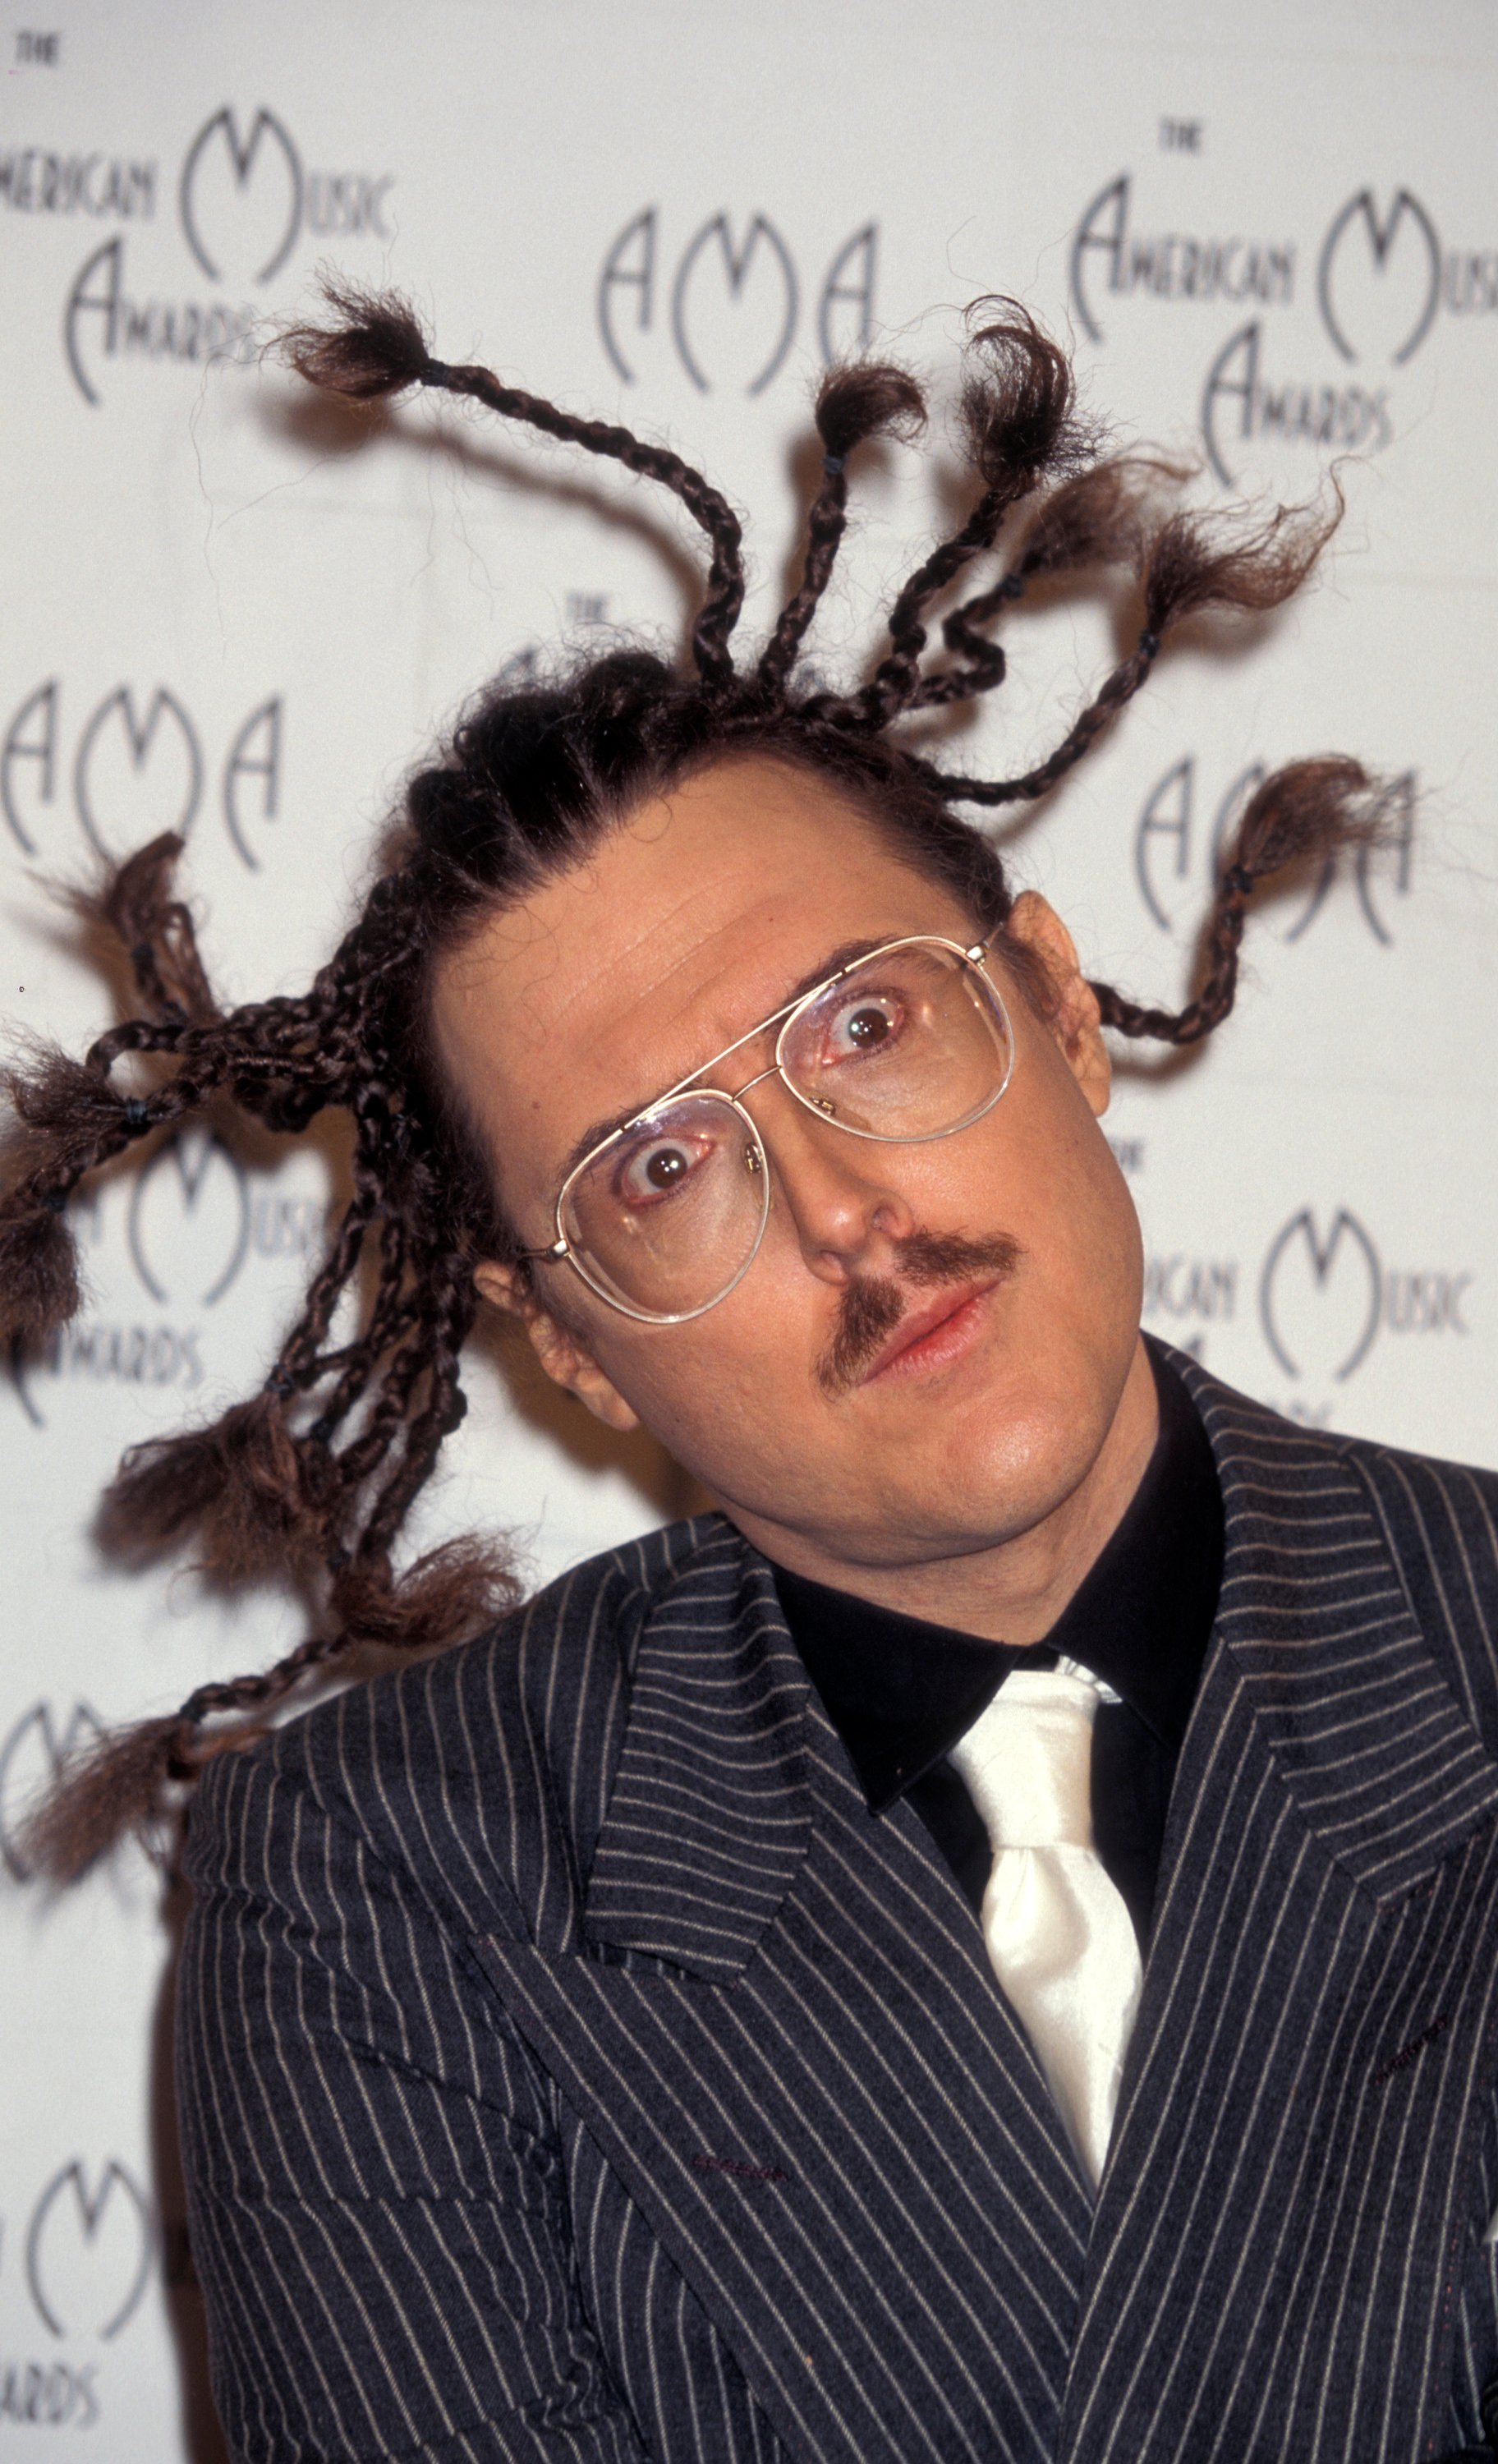 Weird Al Yankovic Over the Years: His Life in Photo